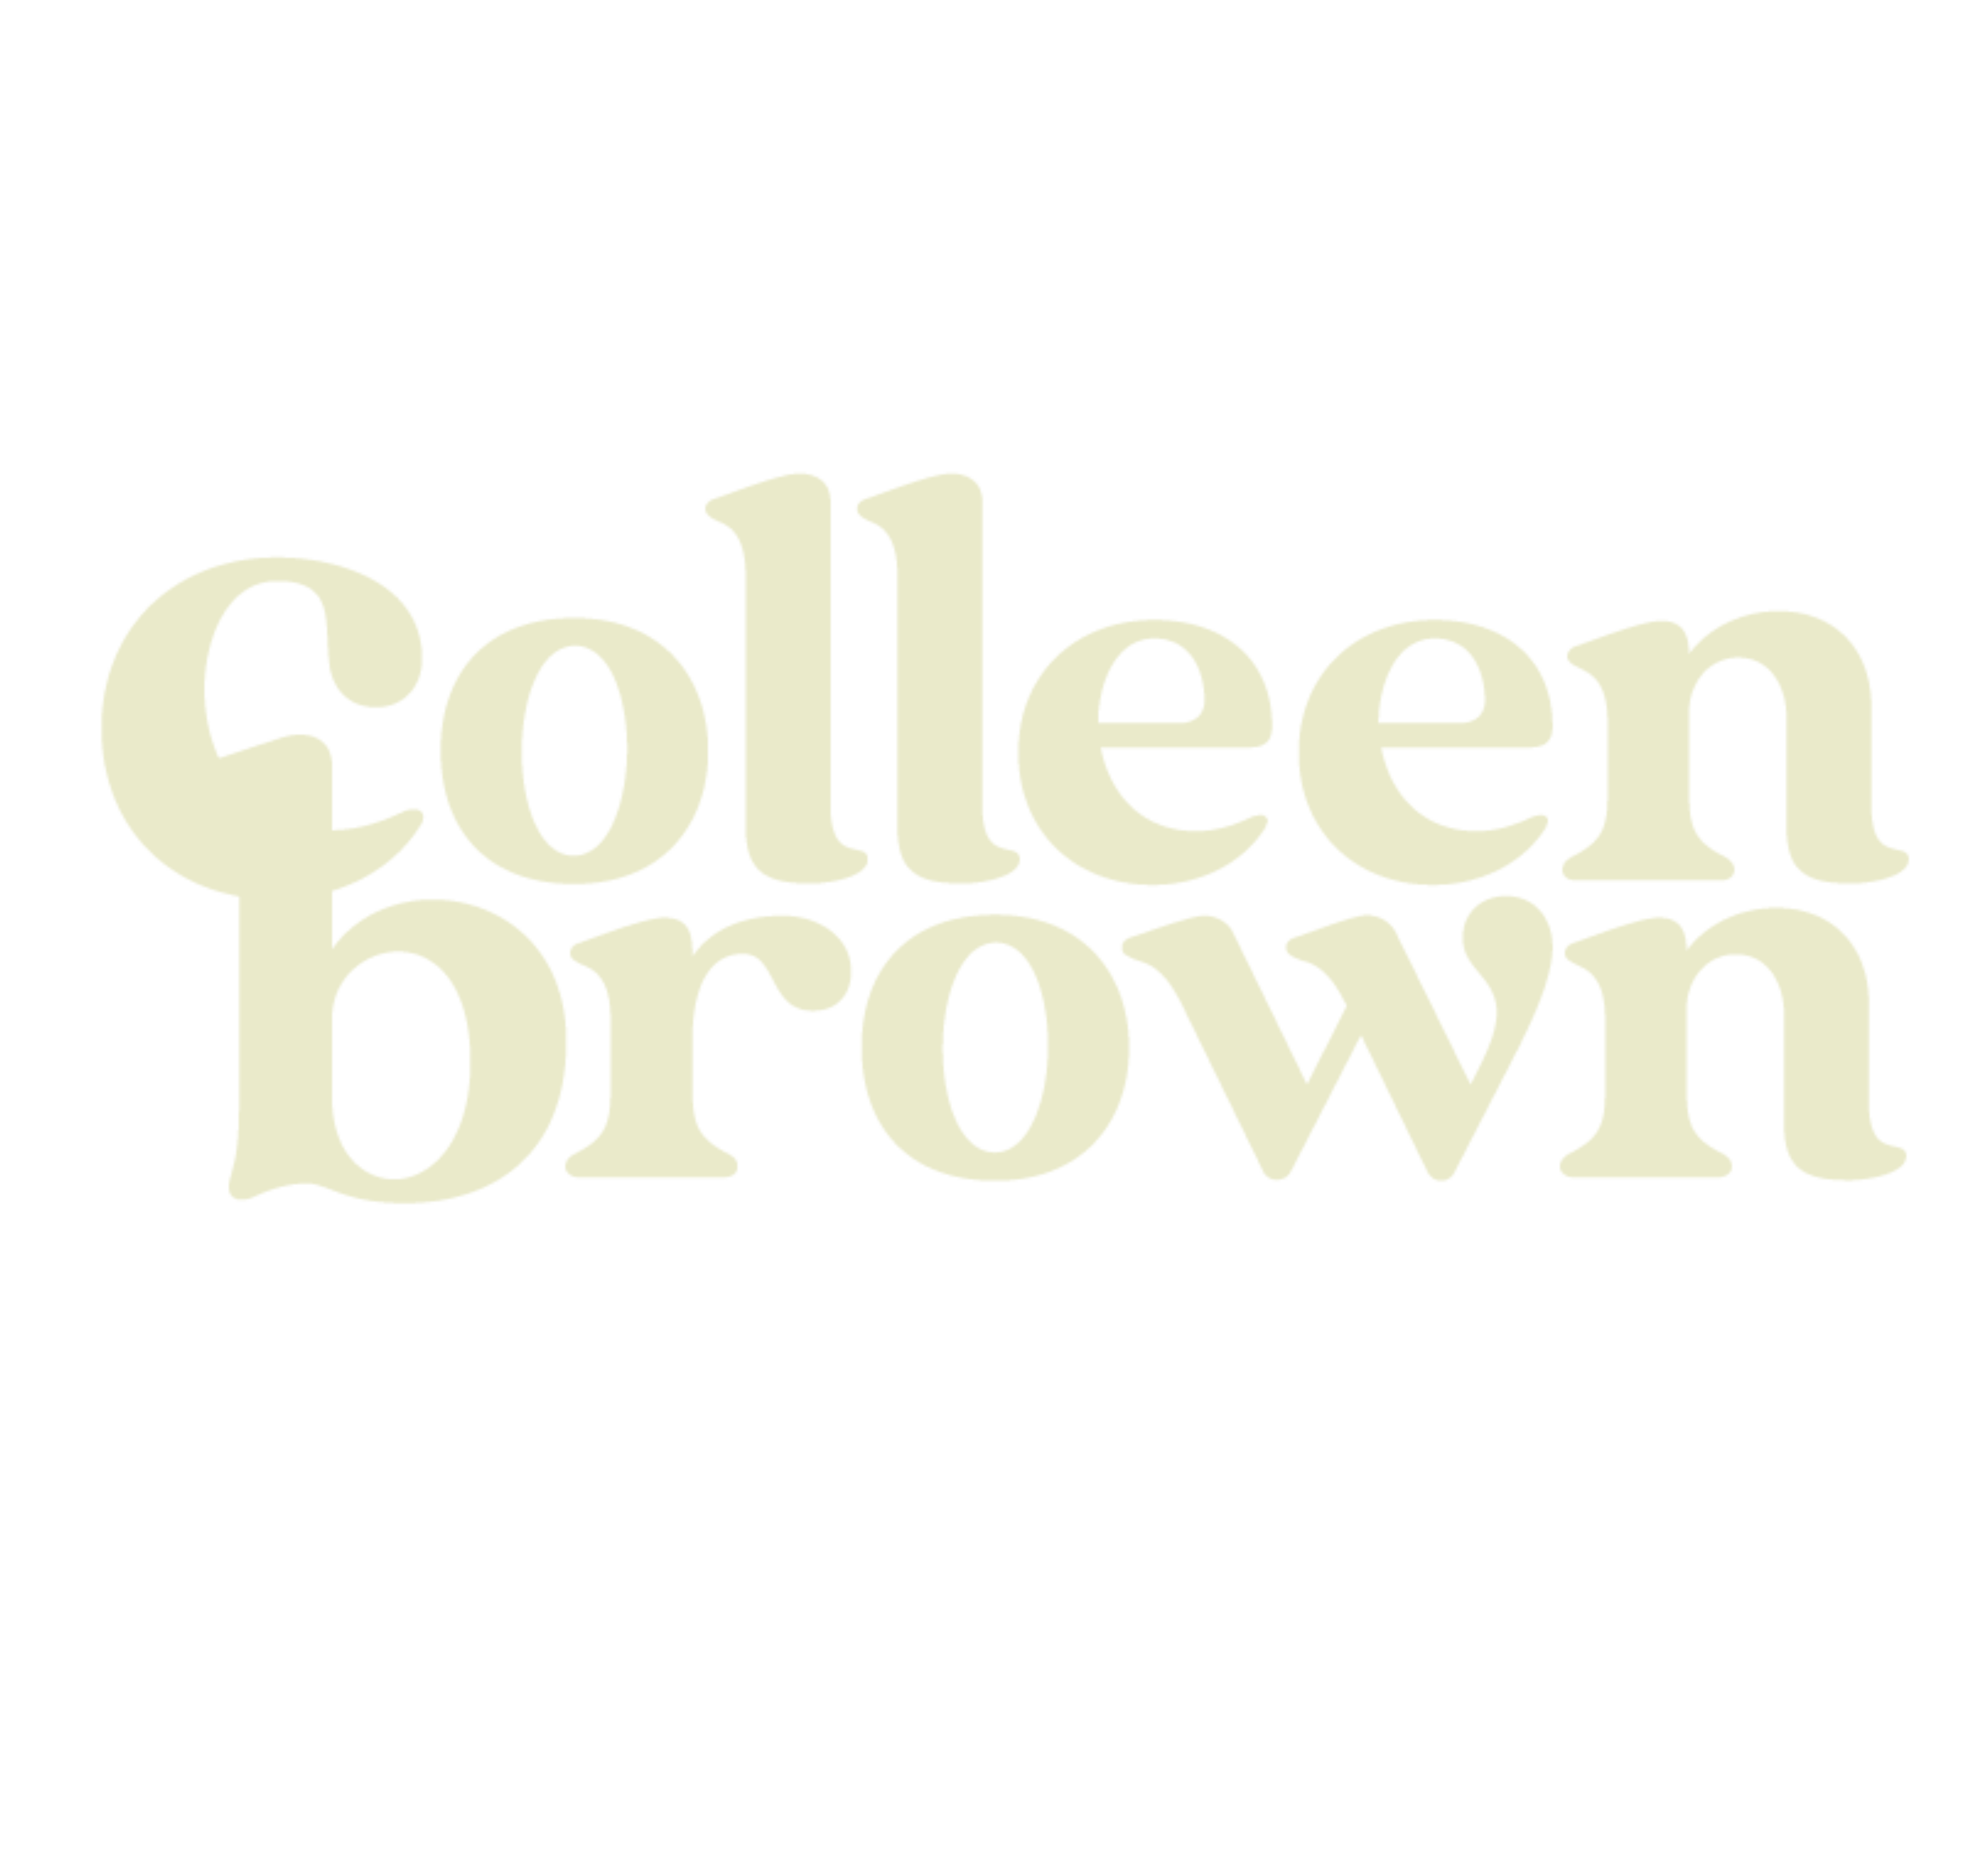 Colleen Brown